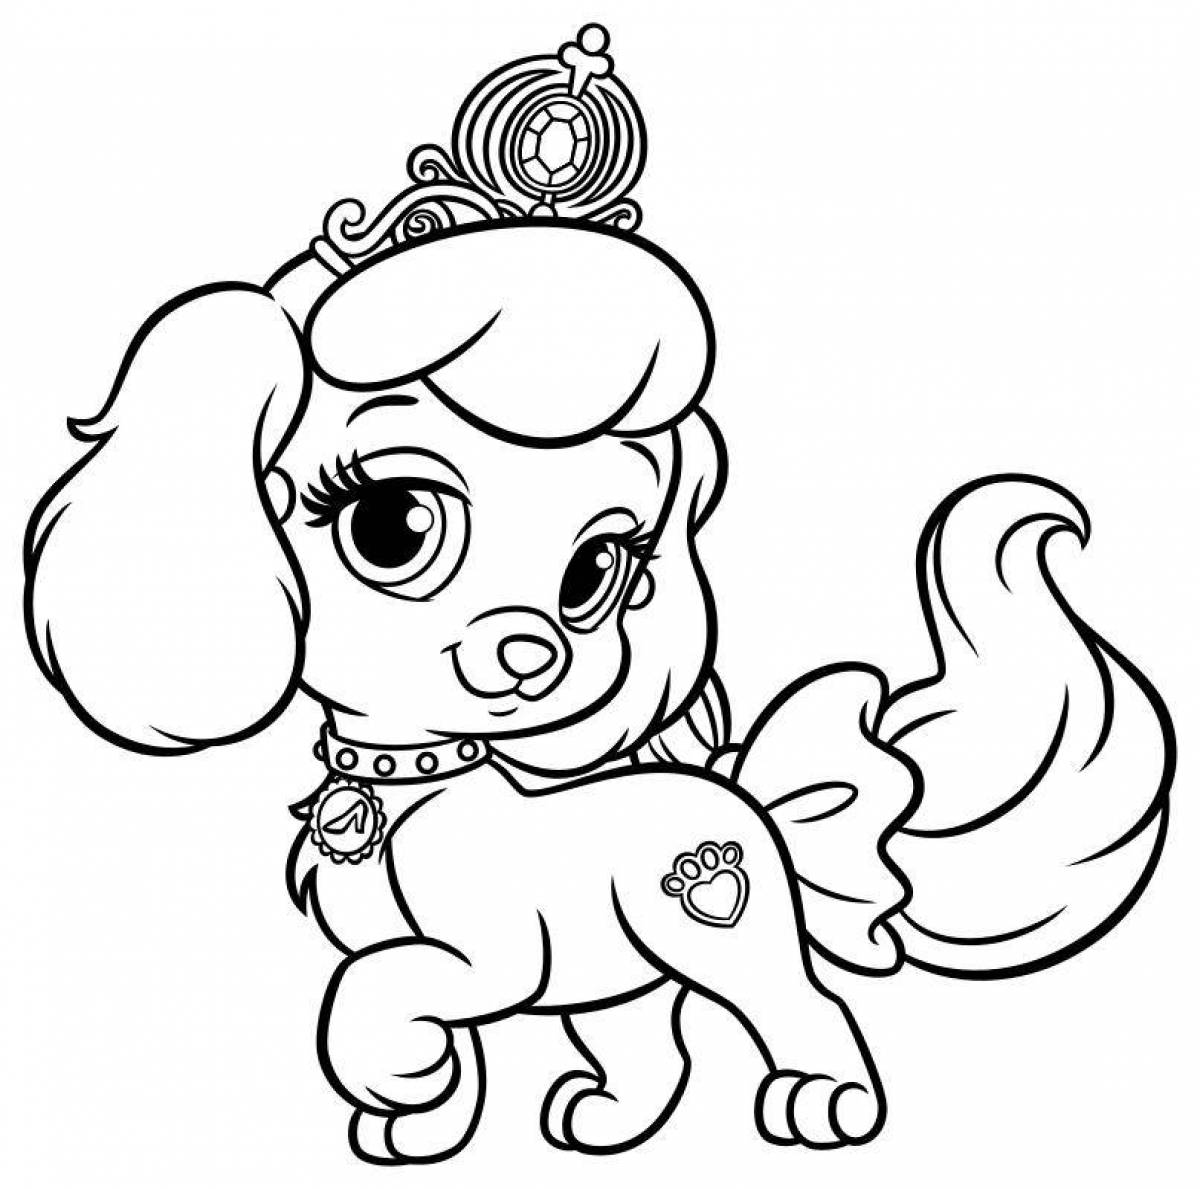 Puppy snuggly coloring page